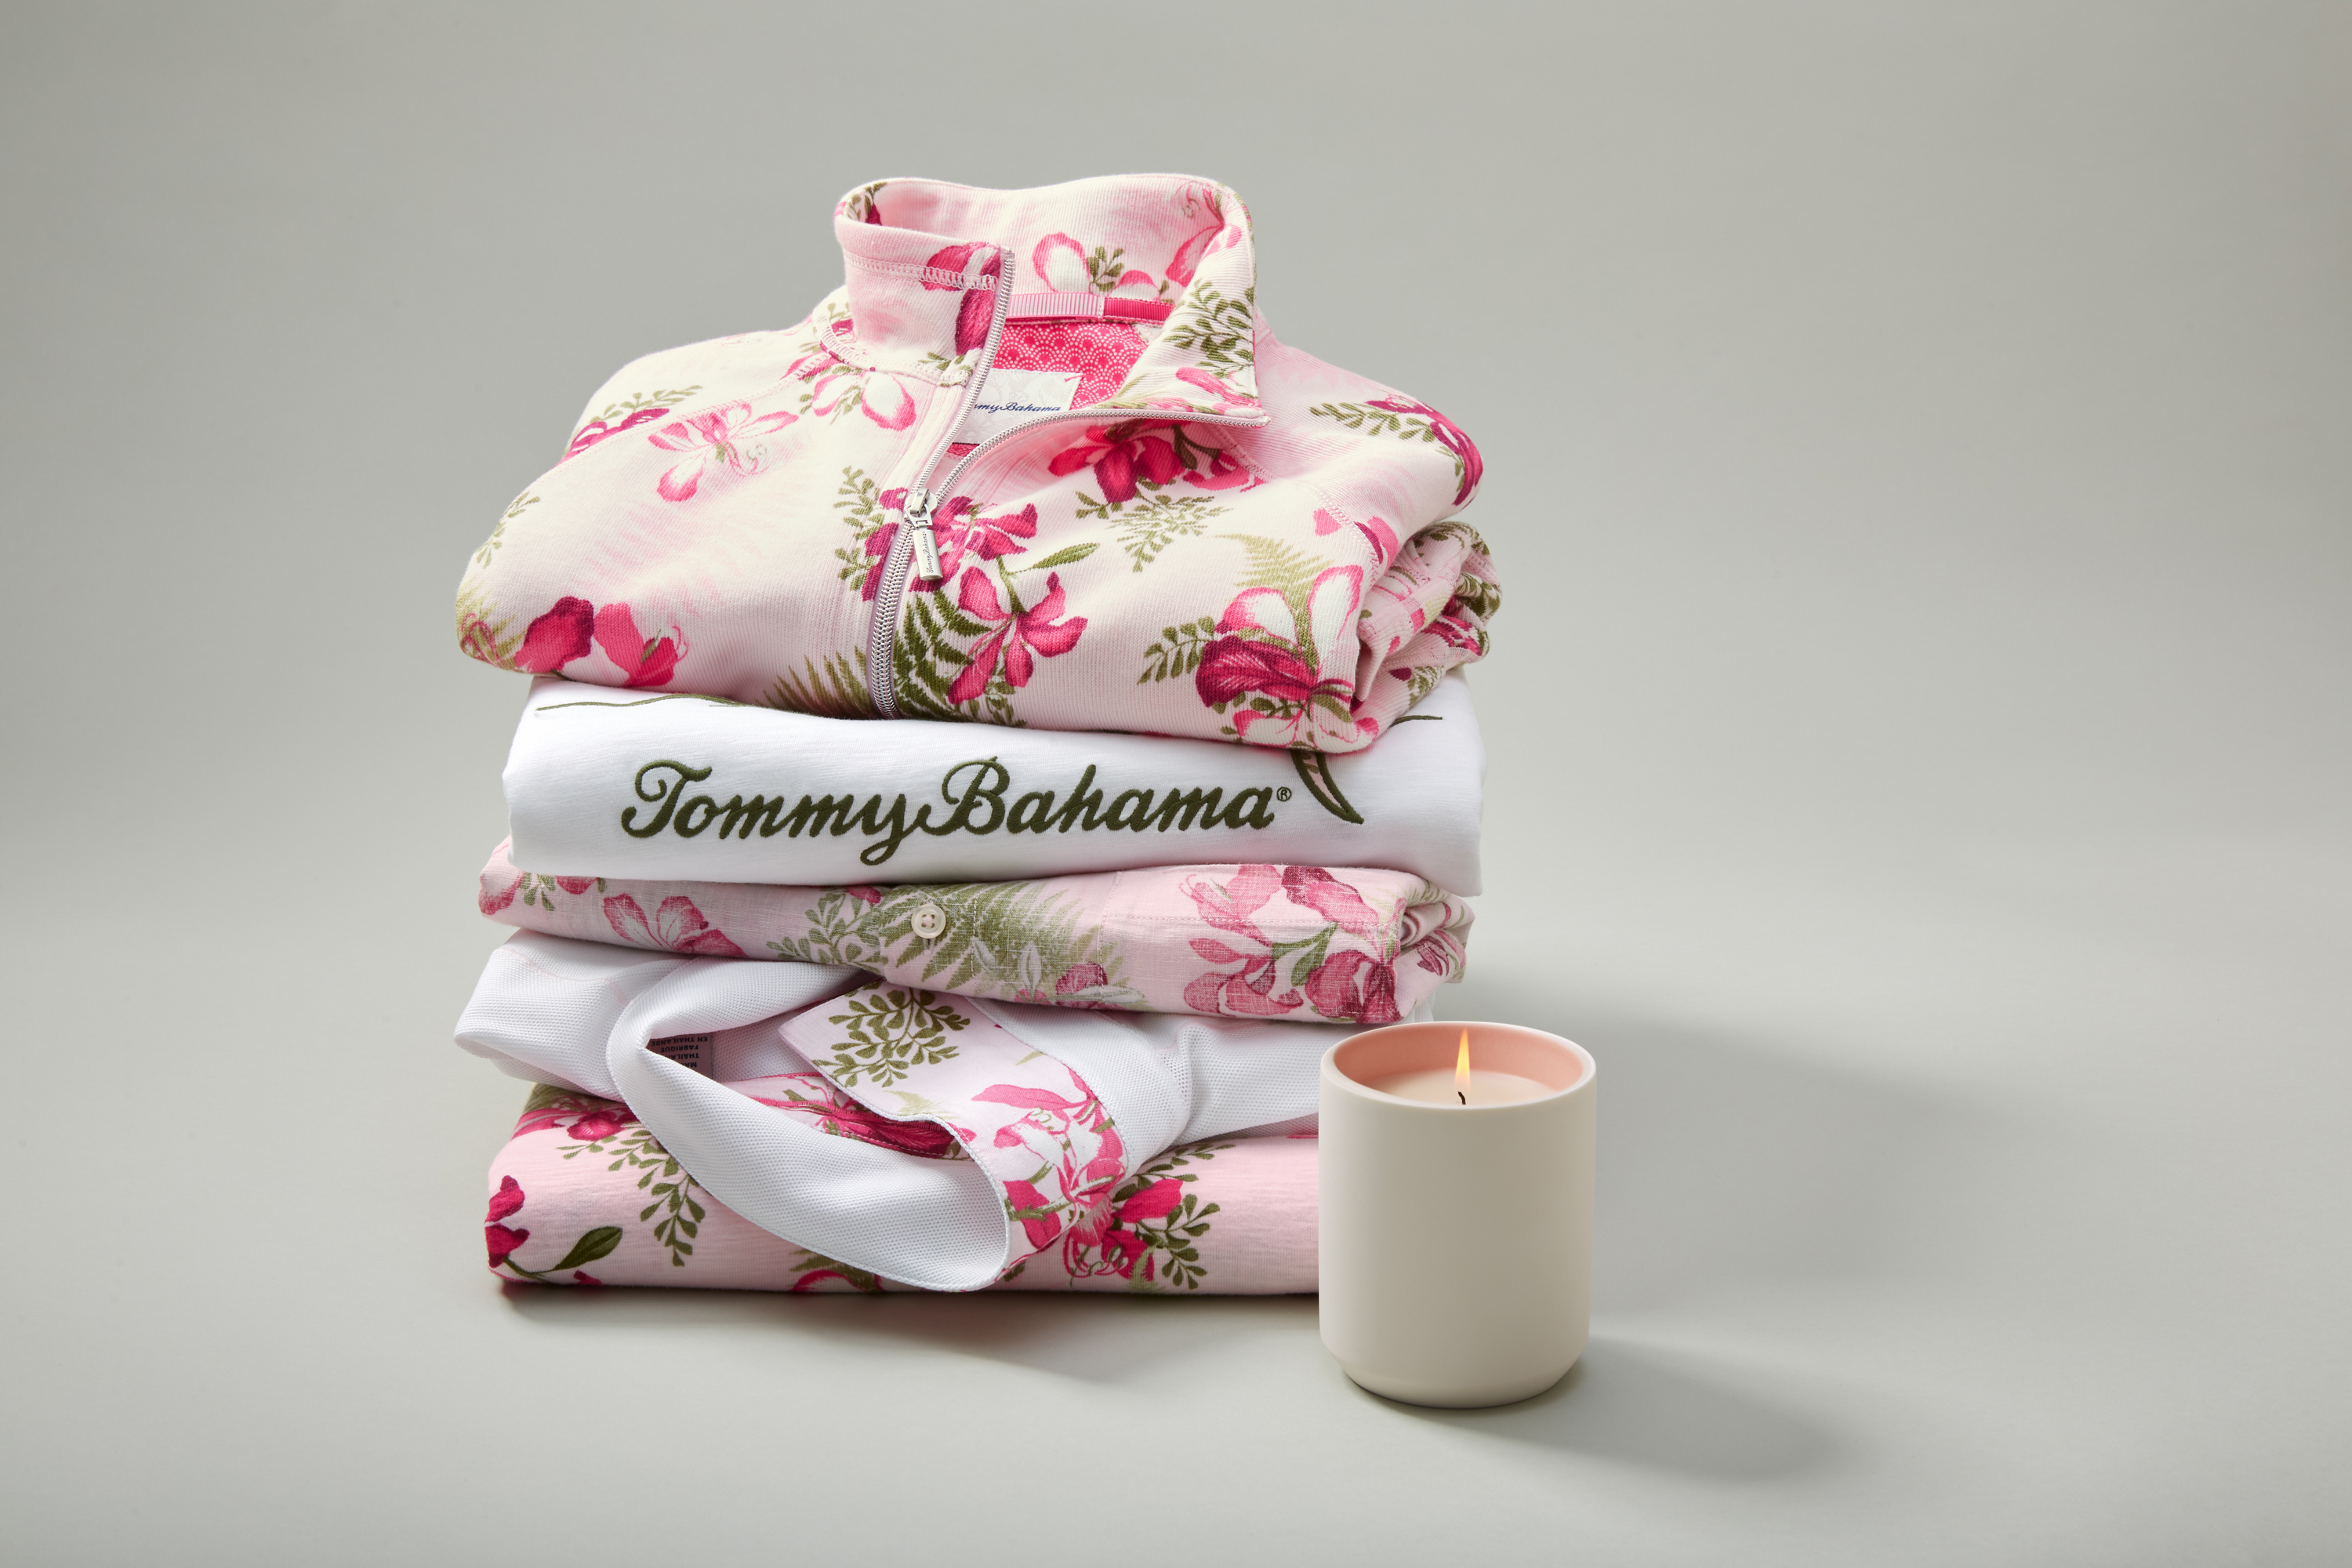 Breast Cancer Awareness Capsule Collection from Tommy Bahama